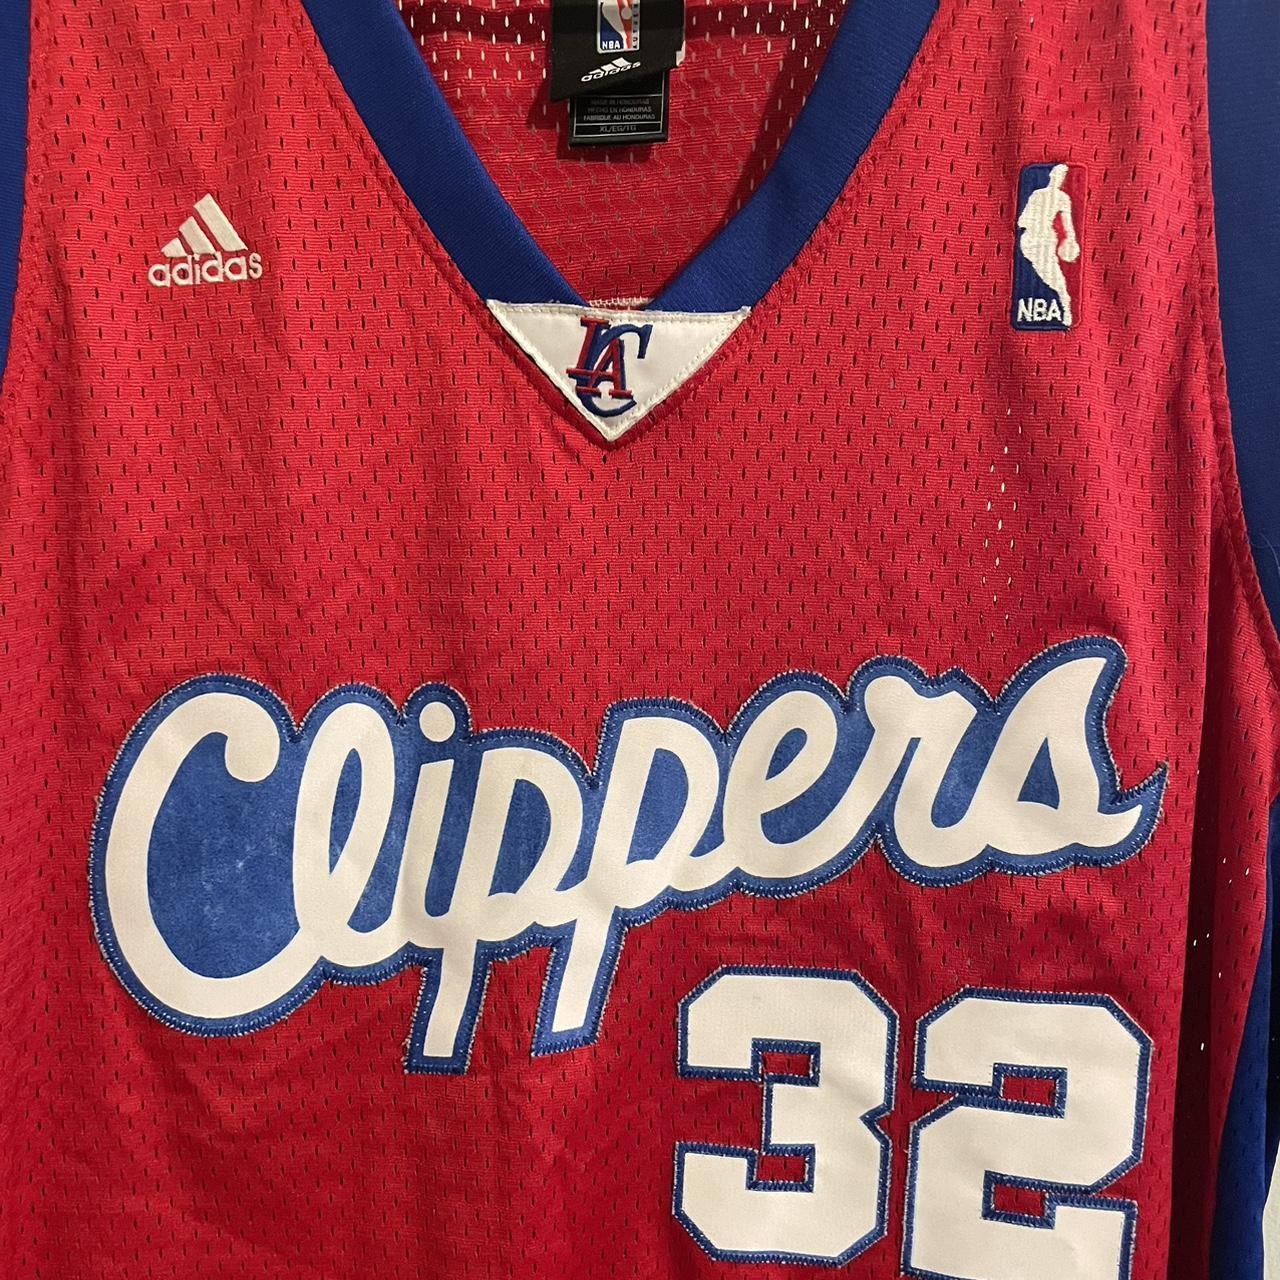 Vintage 00s White Adidas NBA Los Angeles Clippers Blake Griffin 32